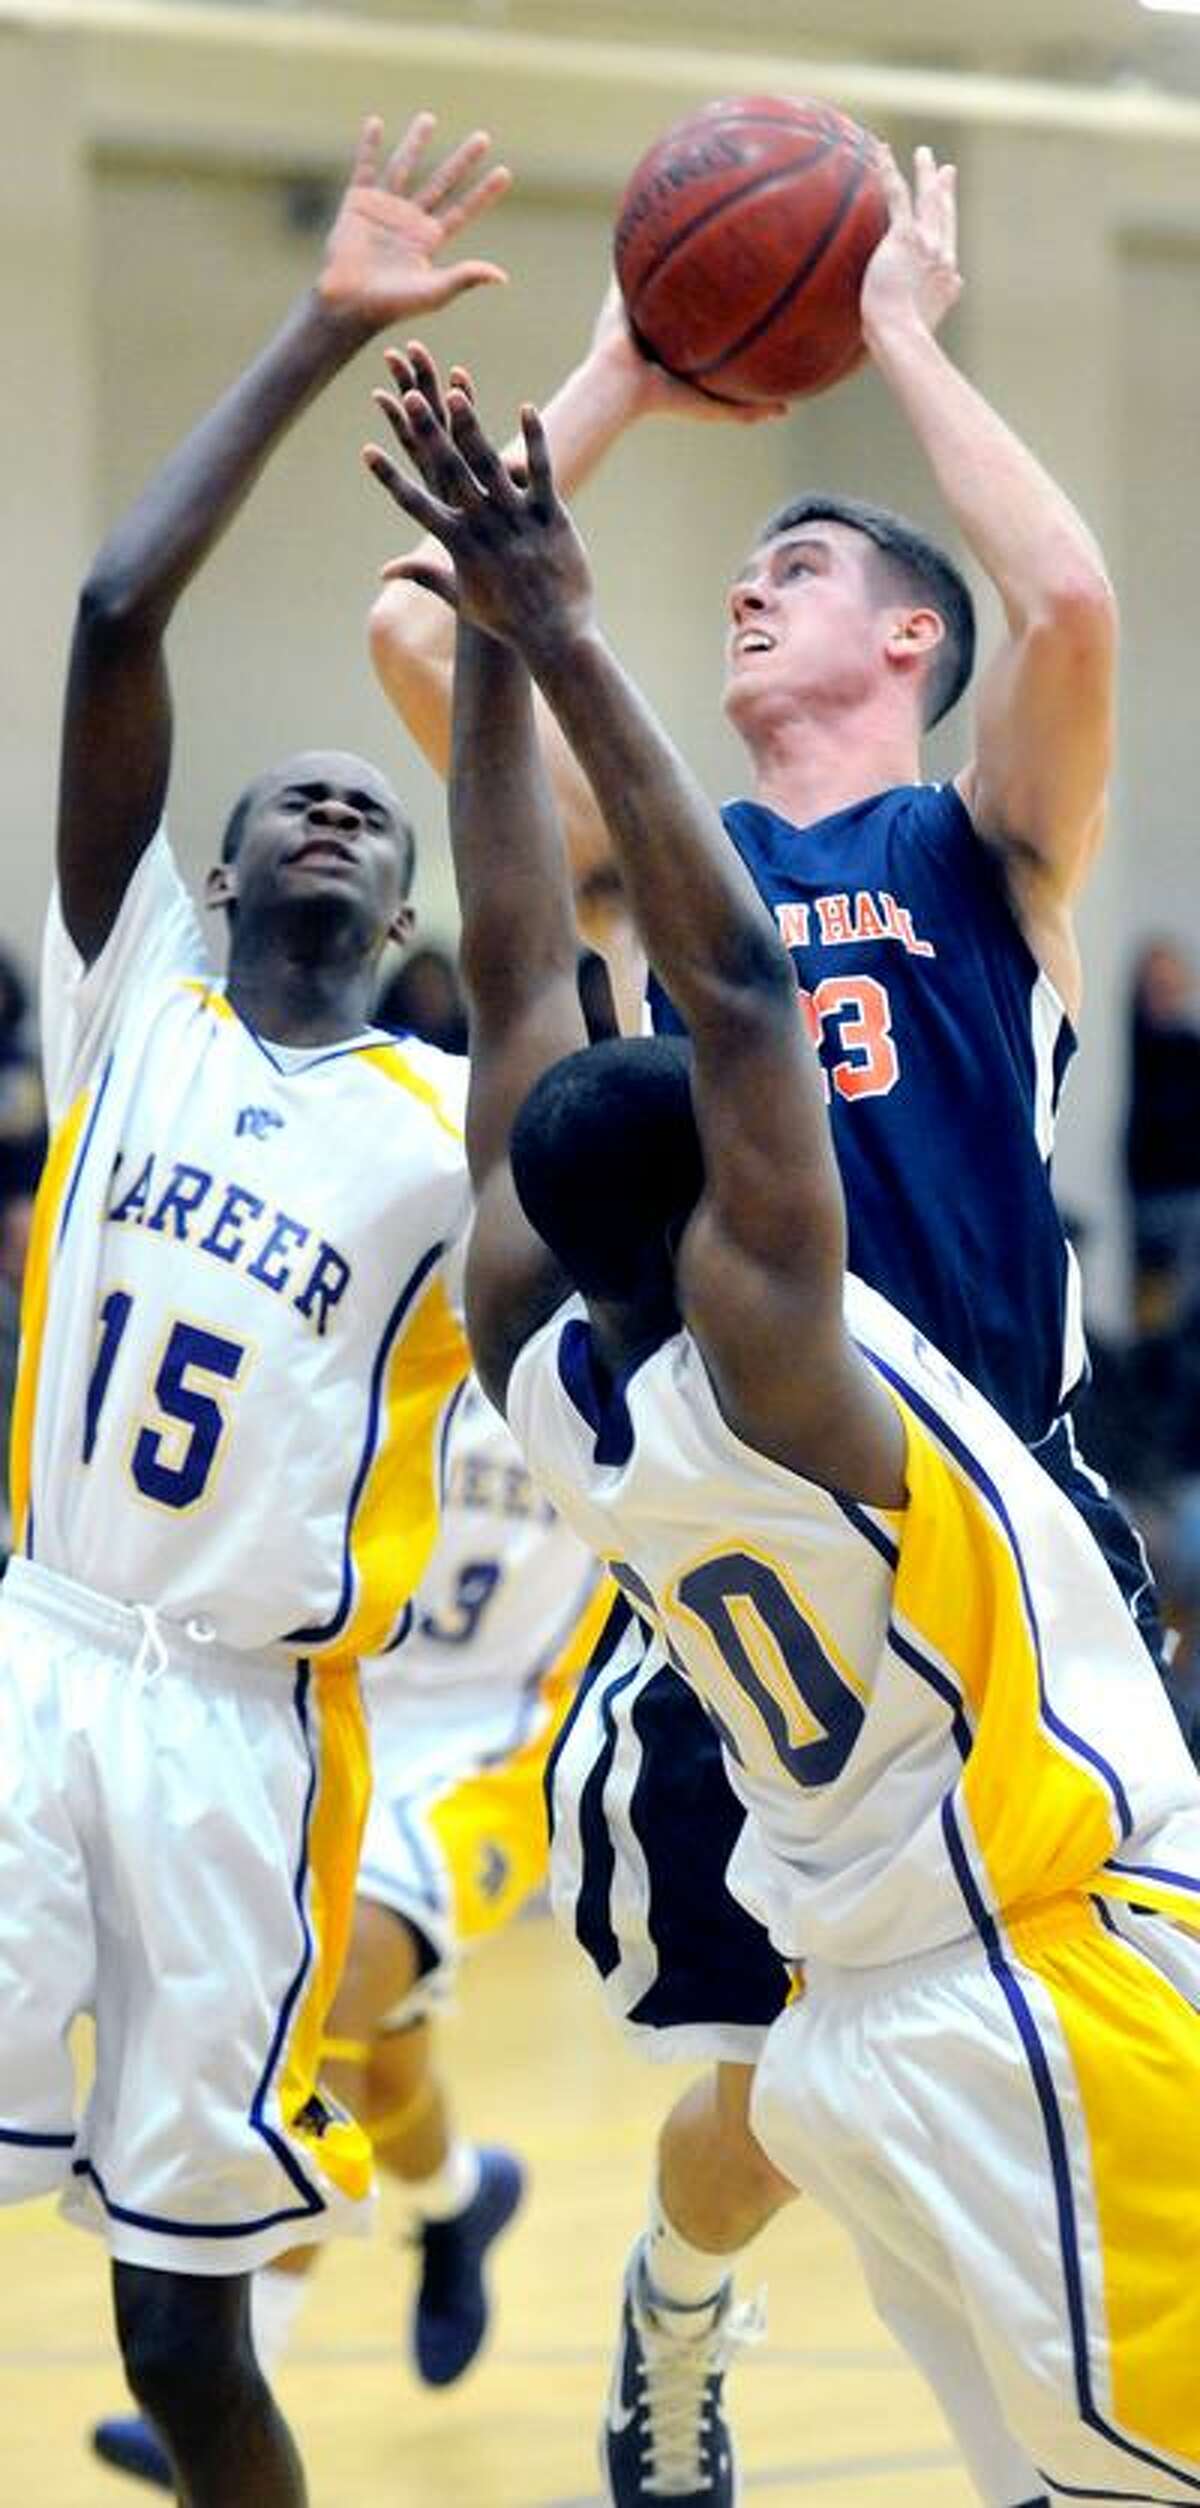 John DeSandre (right) of Lyman Hall takes a shot over Kenny Armstead (left) and Greg Johnson (bottom)of Career in the first half at Career High School in New Haven on 1/28/2011. Career won 57-55.Photo by Arnold Gold/New Haven Register AG0401C